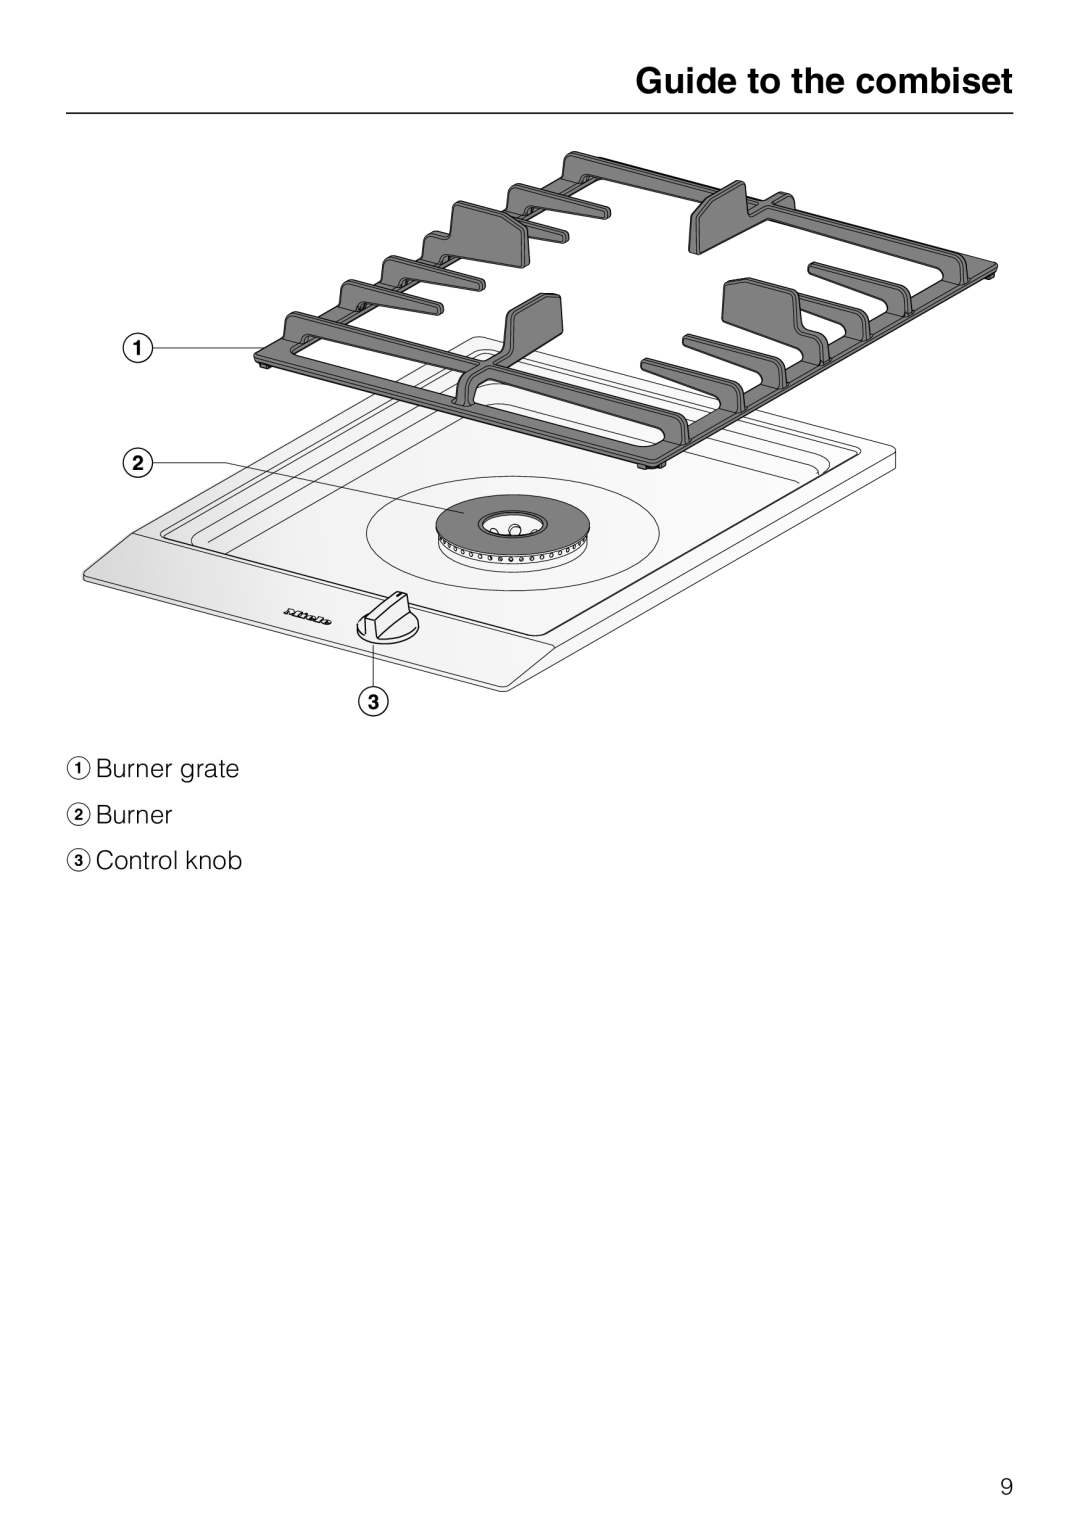 Miele CS1028 installation instructions Guide to the combiset, Burner grate Burner Control knob 